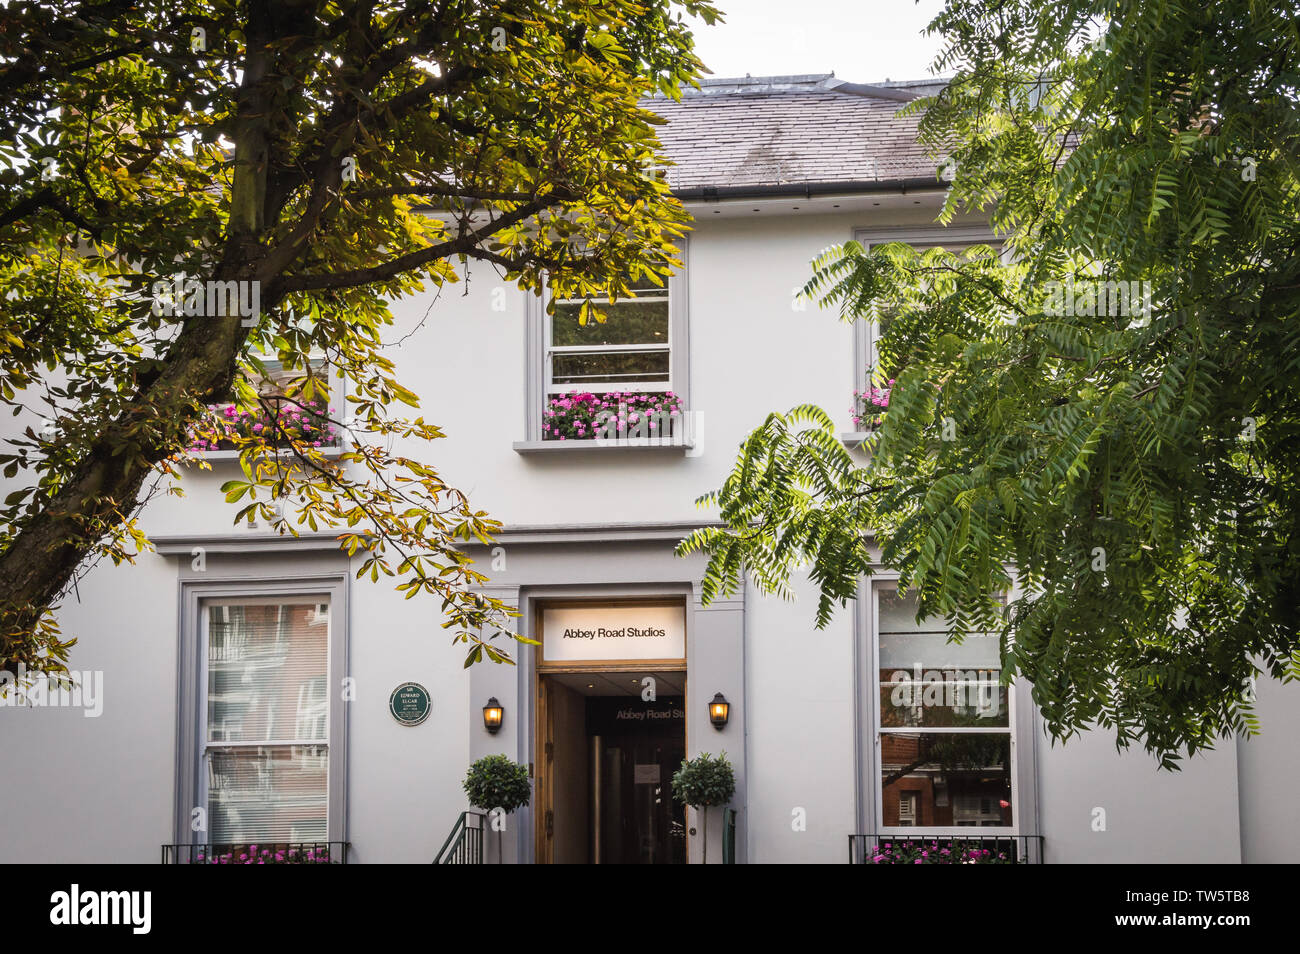 London - July 8th 2014: Abbey Road Studios facade surrounded by vegetation Stock Photo